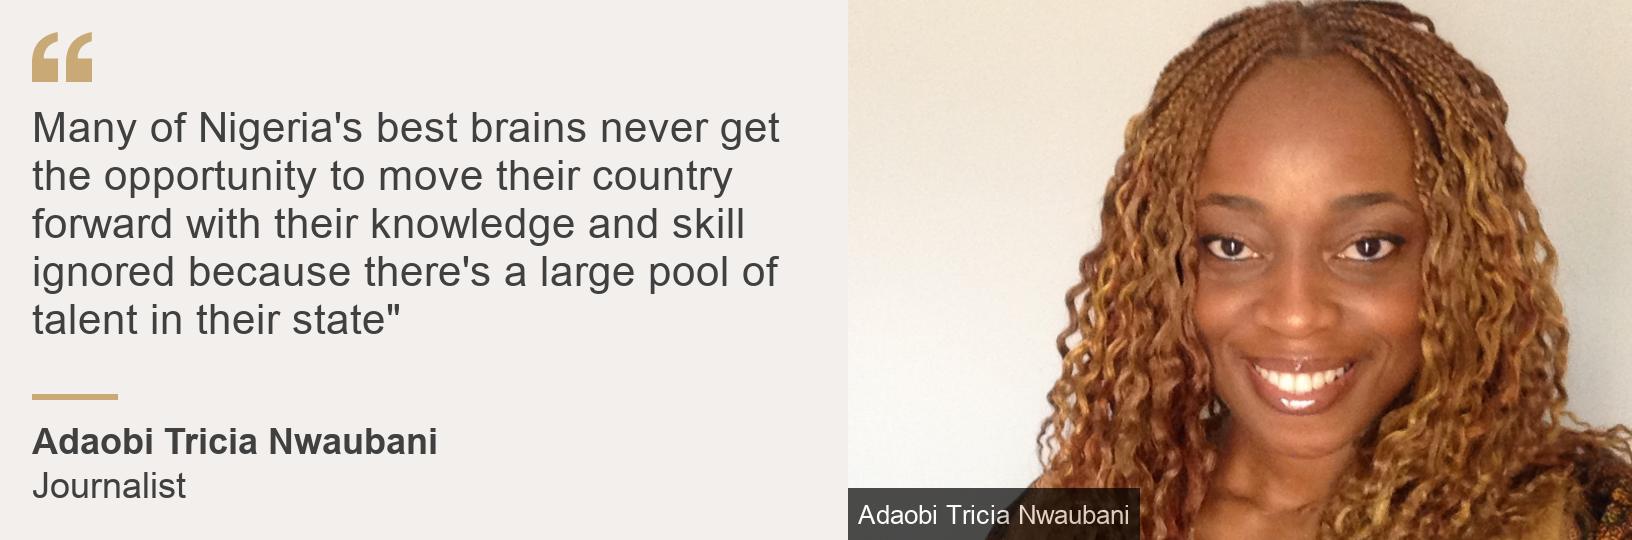 &quot;Many of Nigeria&#39;s best brains never get the opportunity to move their country forward with their knowledge and skill ignored because there&#39;s a large pool of talent in their state&quot;&quot;, Source: Adaobi Tricia Nwaubani, Source description: Journalist, Image: Adaobi Tricia Nwaubani